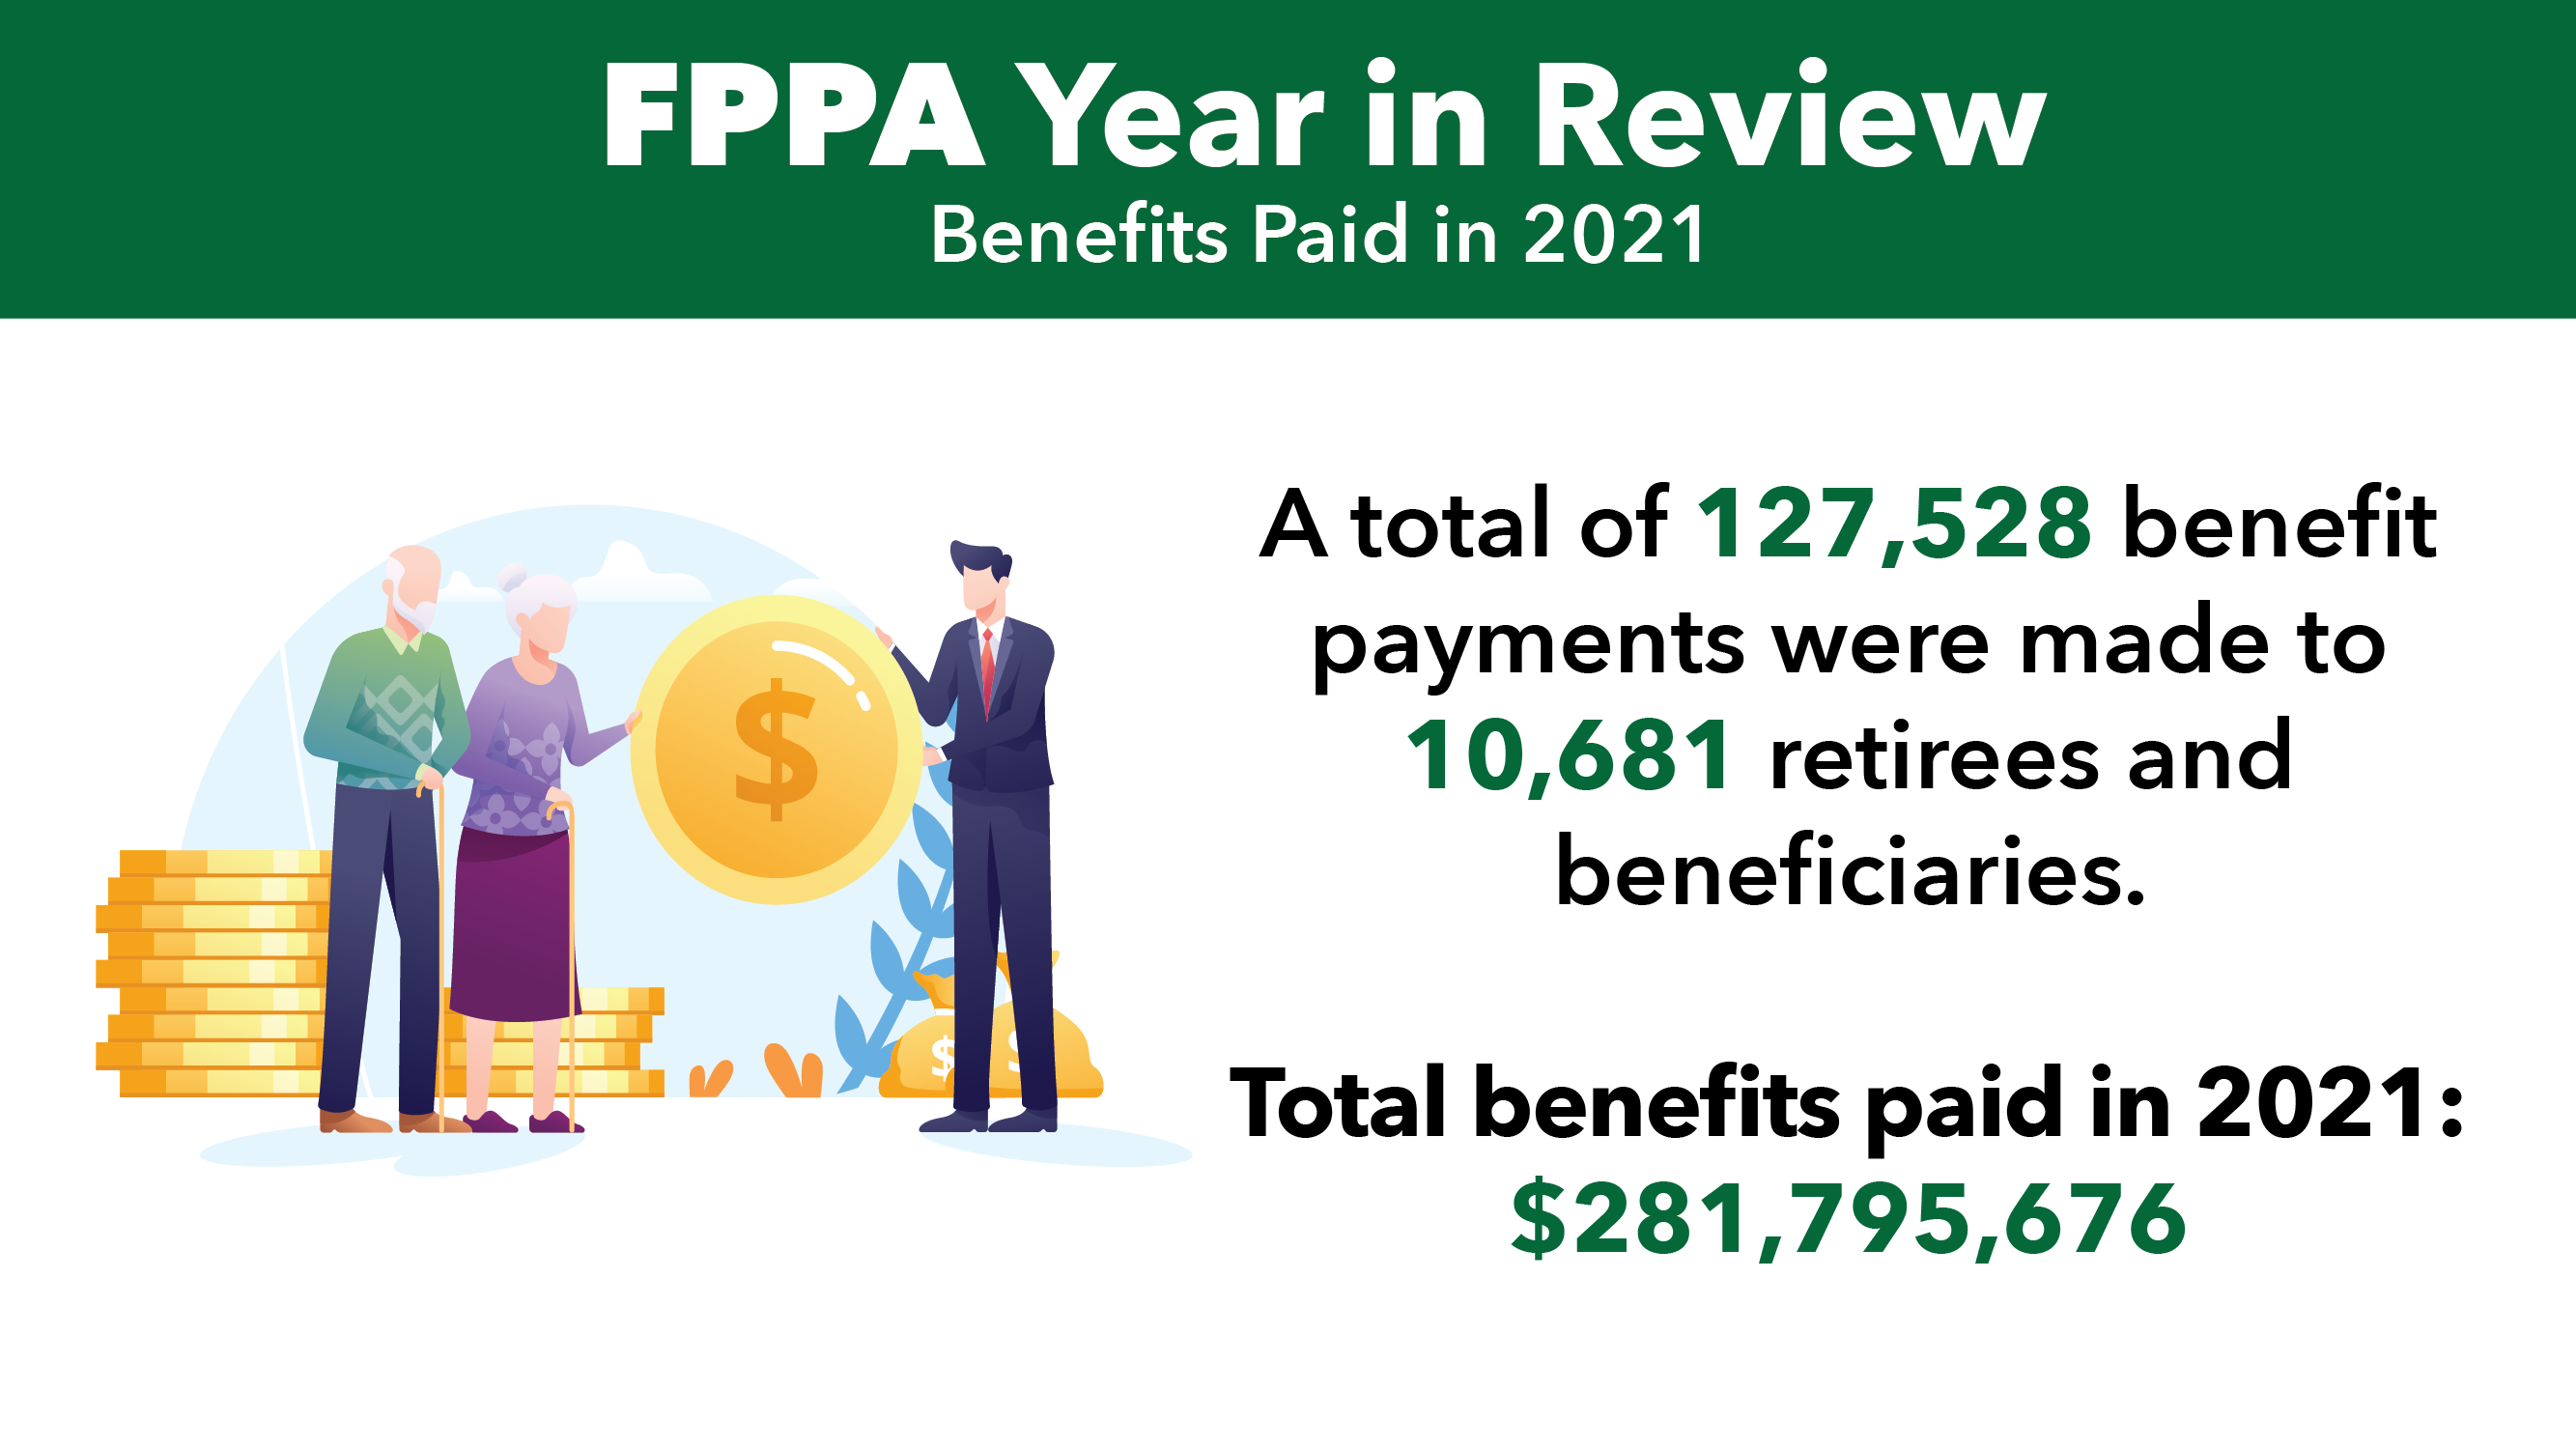 Report on benefits paid in 2021